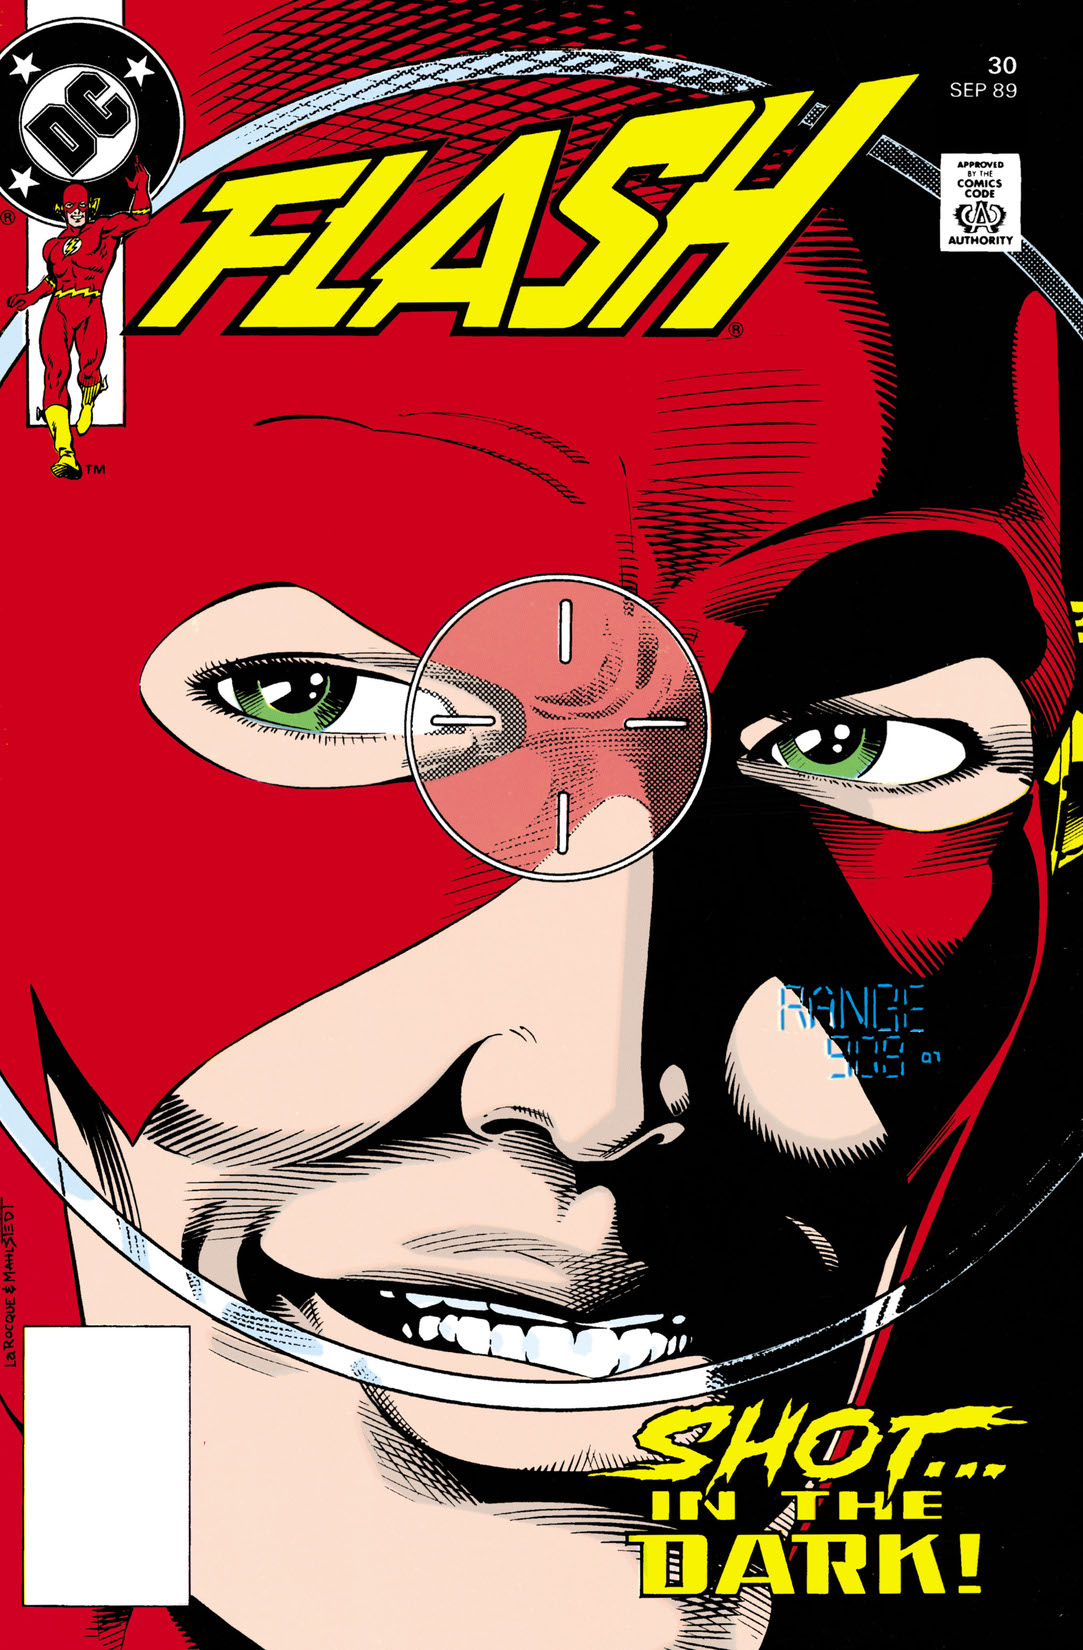 The Flash (1987-) #30 preview images